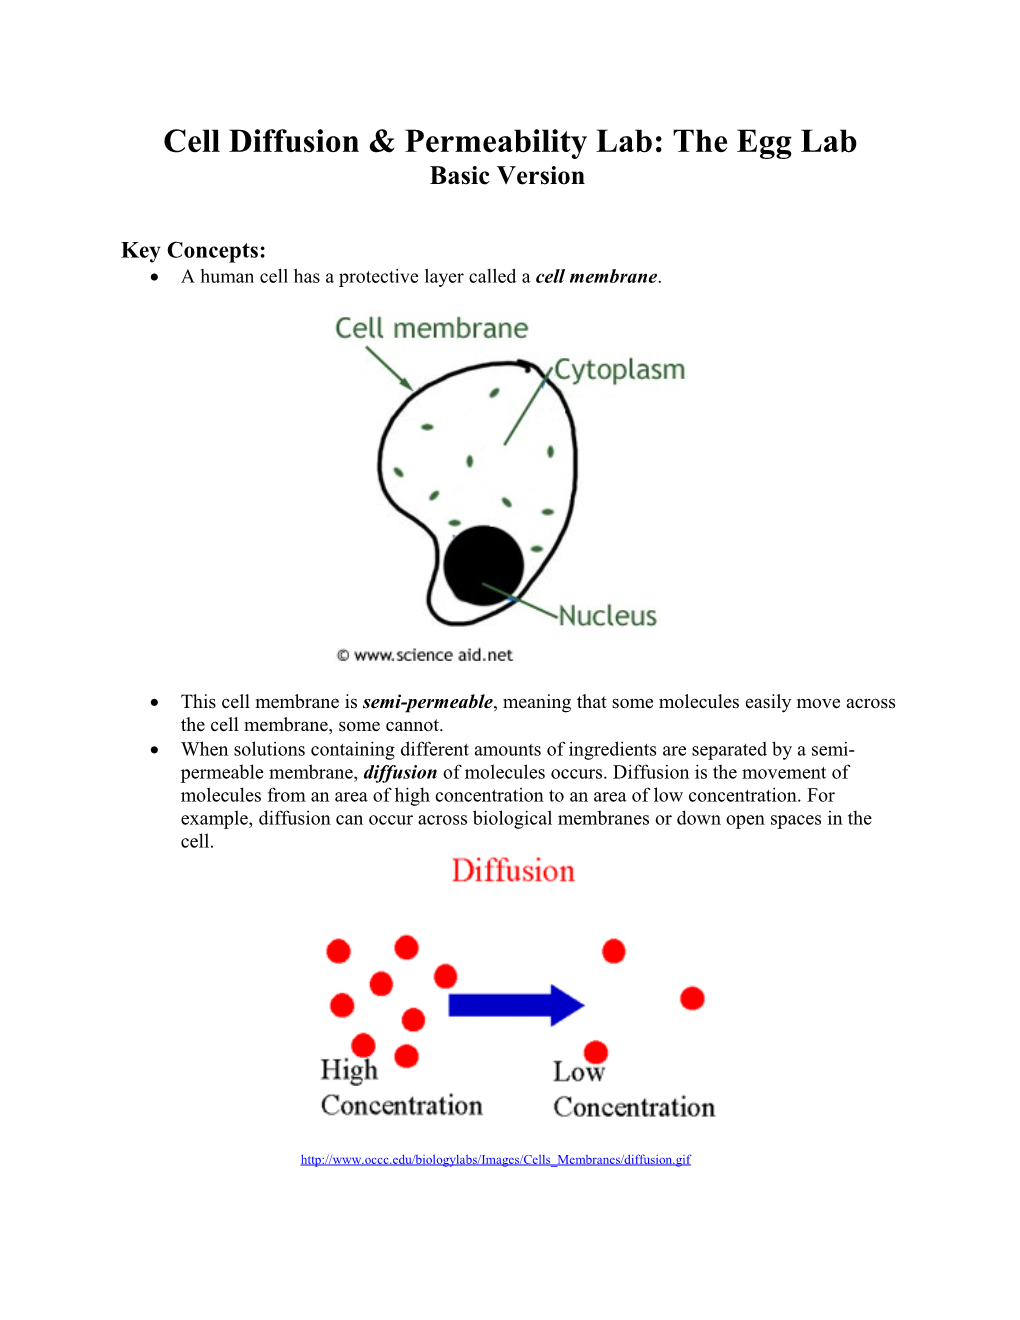 Cell Diffusion & Permeability Lab: the Egg Lab